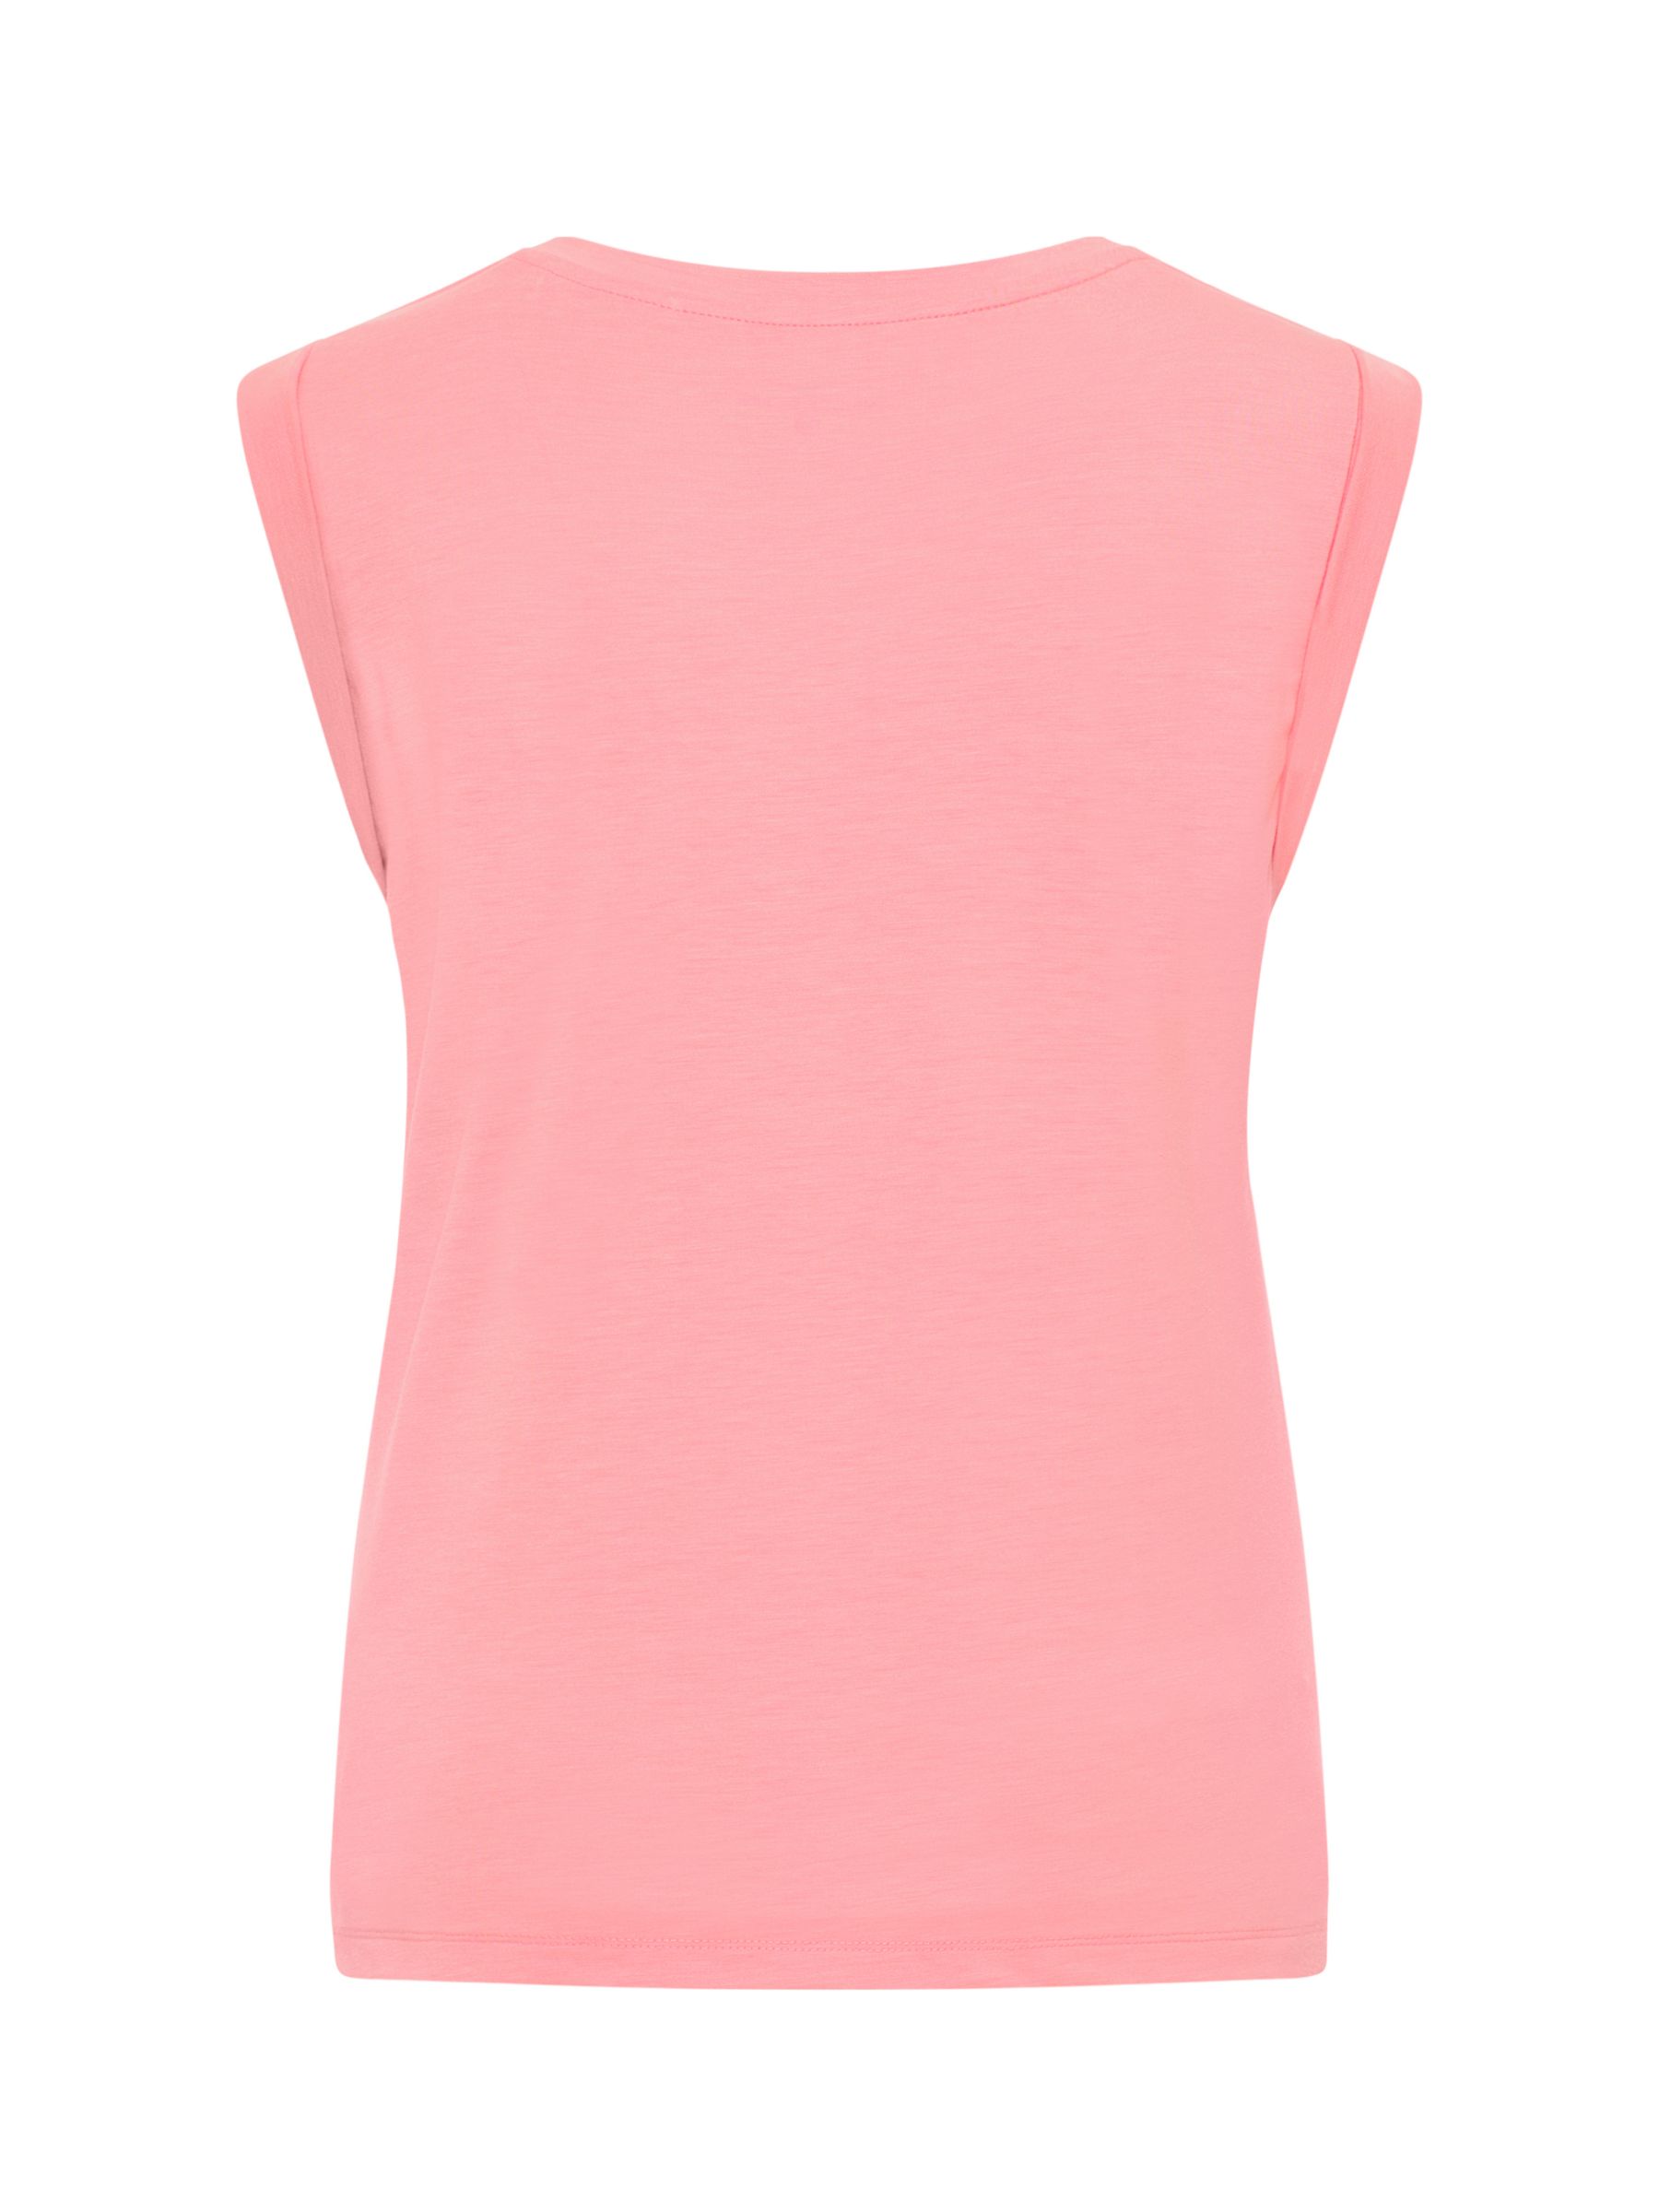 Buy Venice Beach Chayanne Sleeveless Gym Top Online at johnlewis.com